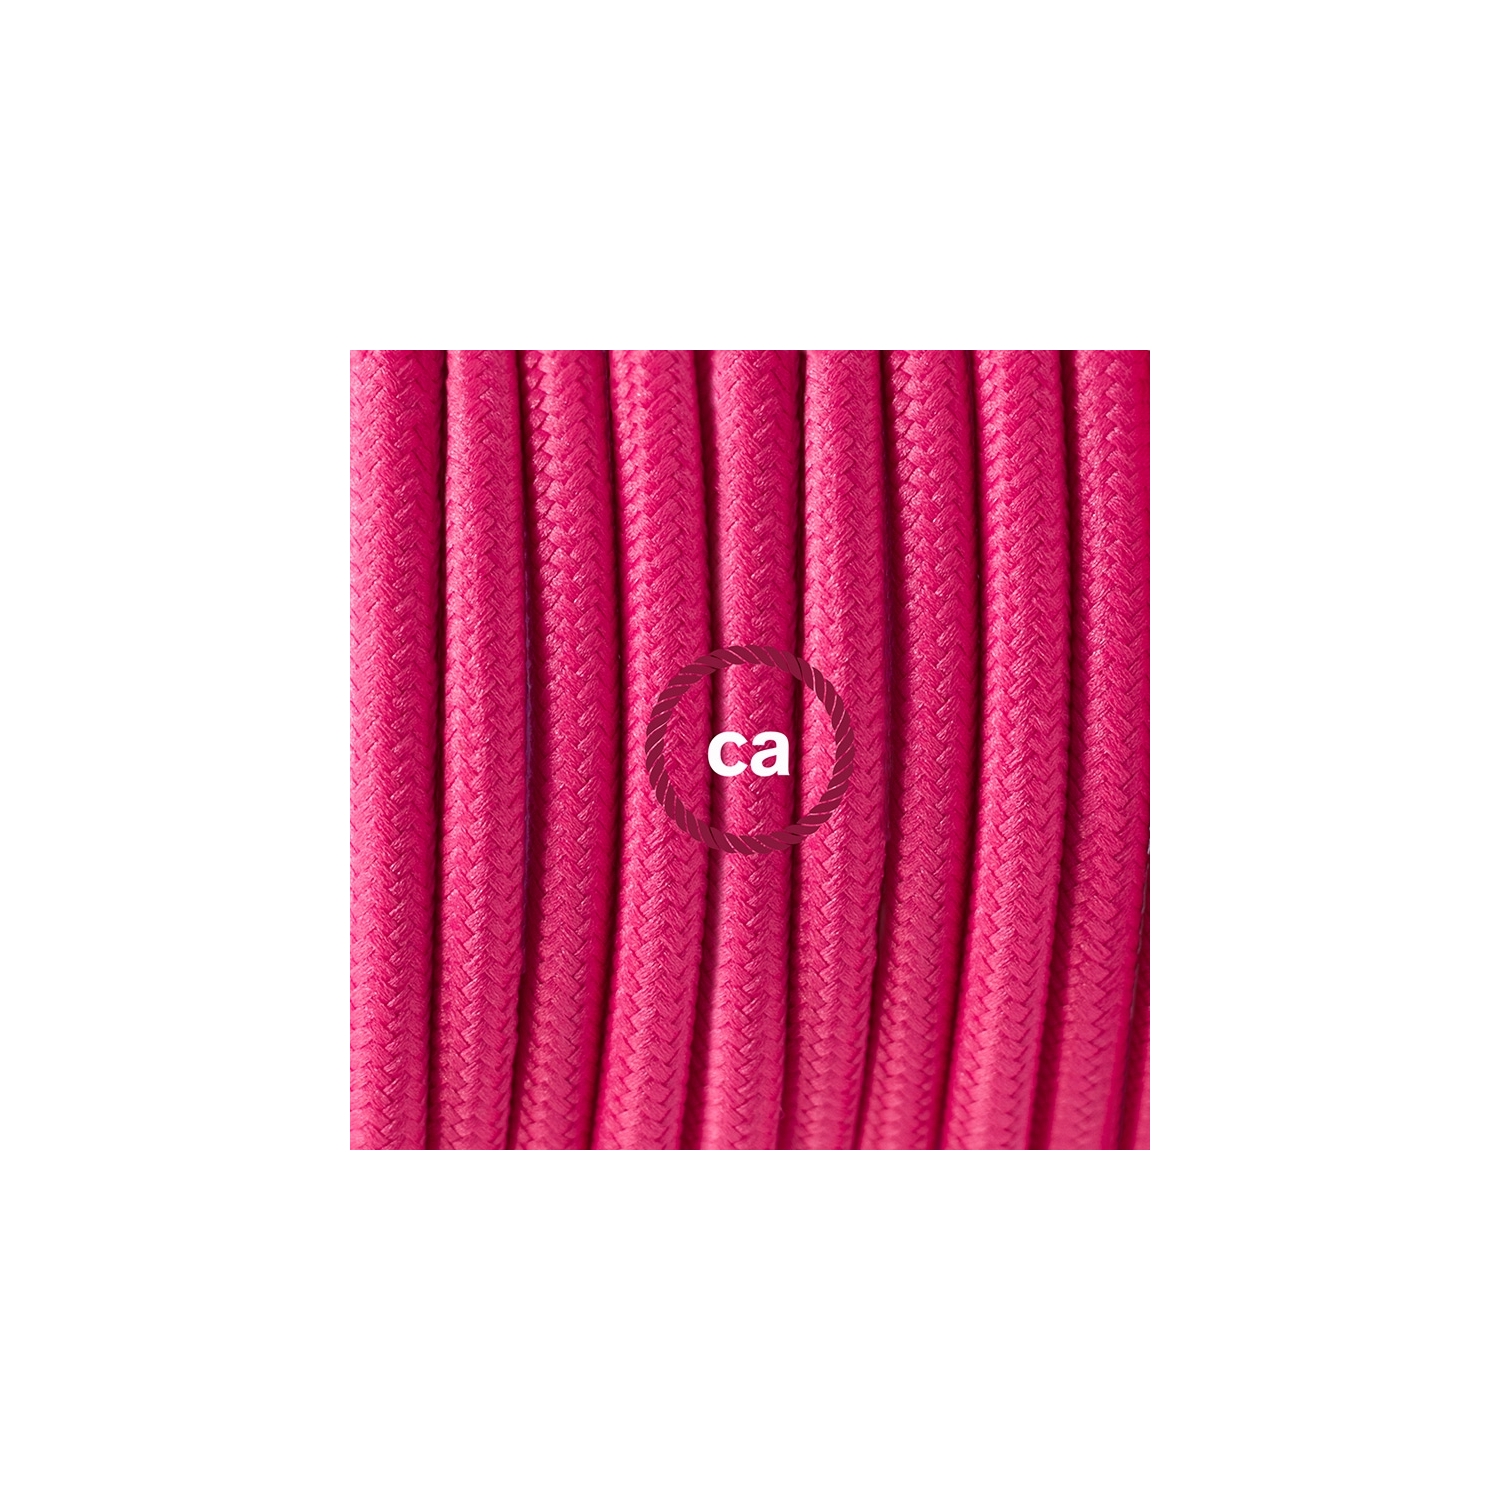 Create your RM08 Fuchsia Rayon Snake and bring the light wherever you want.